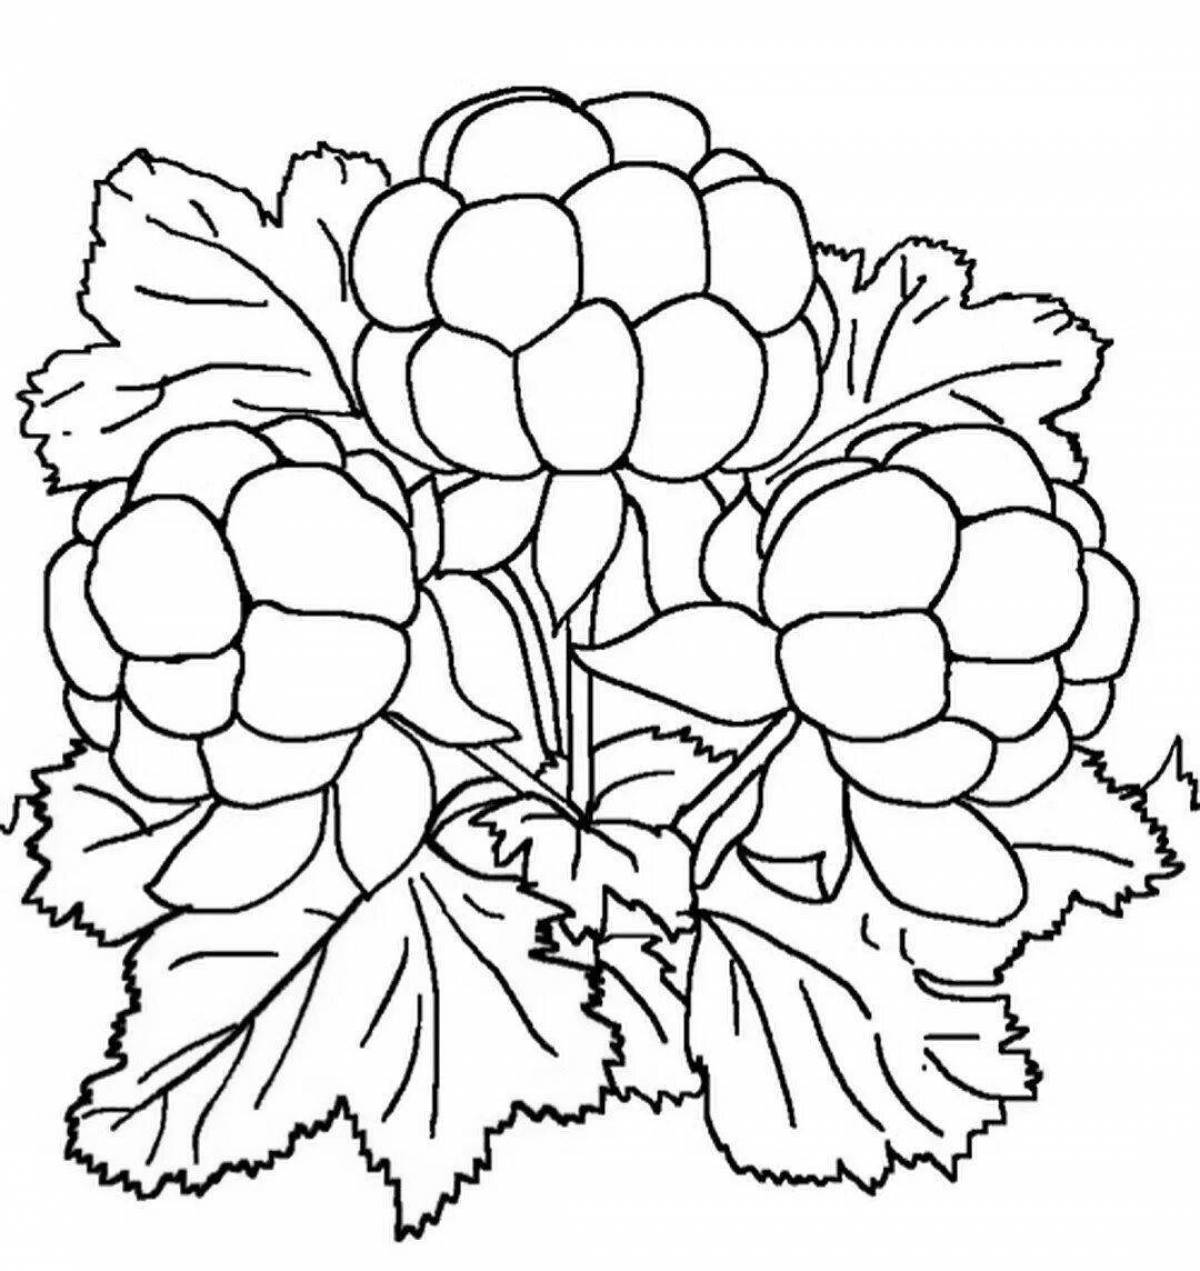 Great cloudberry coloring book for toddlers